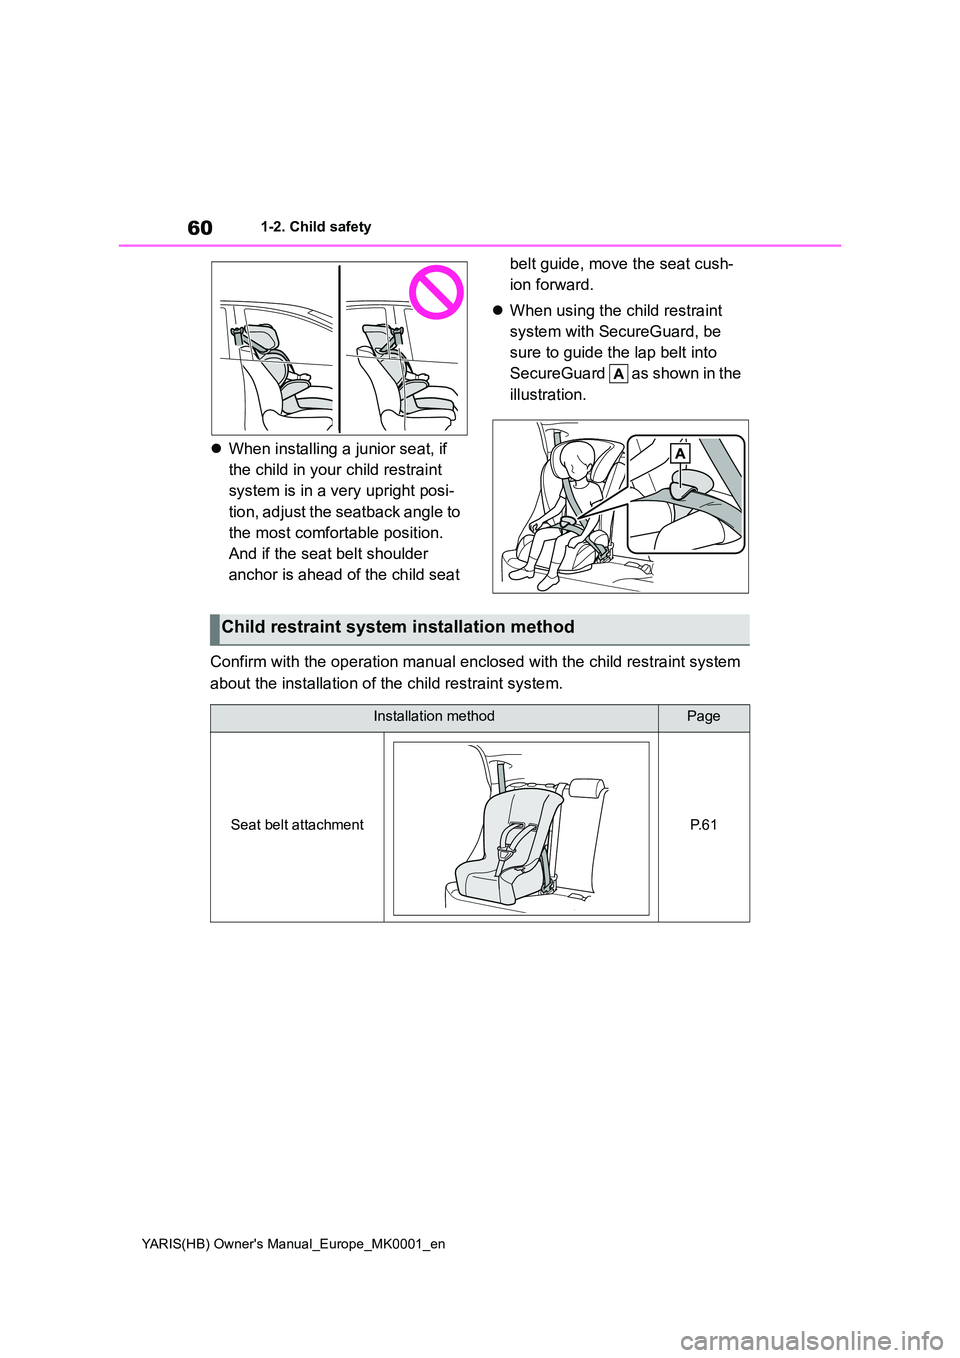 TOYOTA YARIS 2021 Owners Manual 60
YARIS(HB) Owners Manual_Europe_MK0001_en
1-2. Child safety
�zWhen installing a junior seat, if  
the child in your child restraint 
system is in a very upright posi- 
tion, adjust the seatback ang